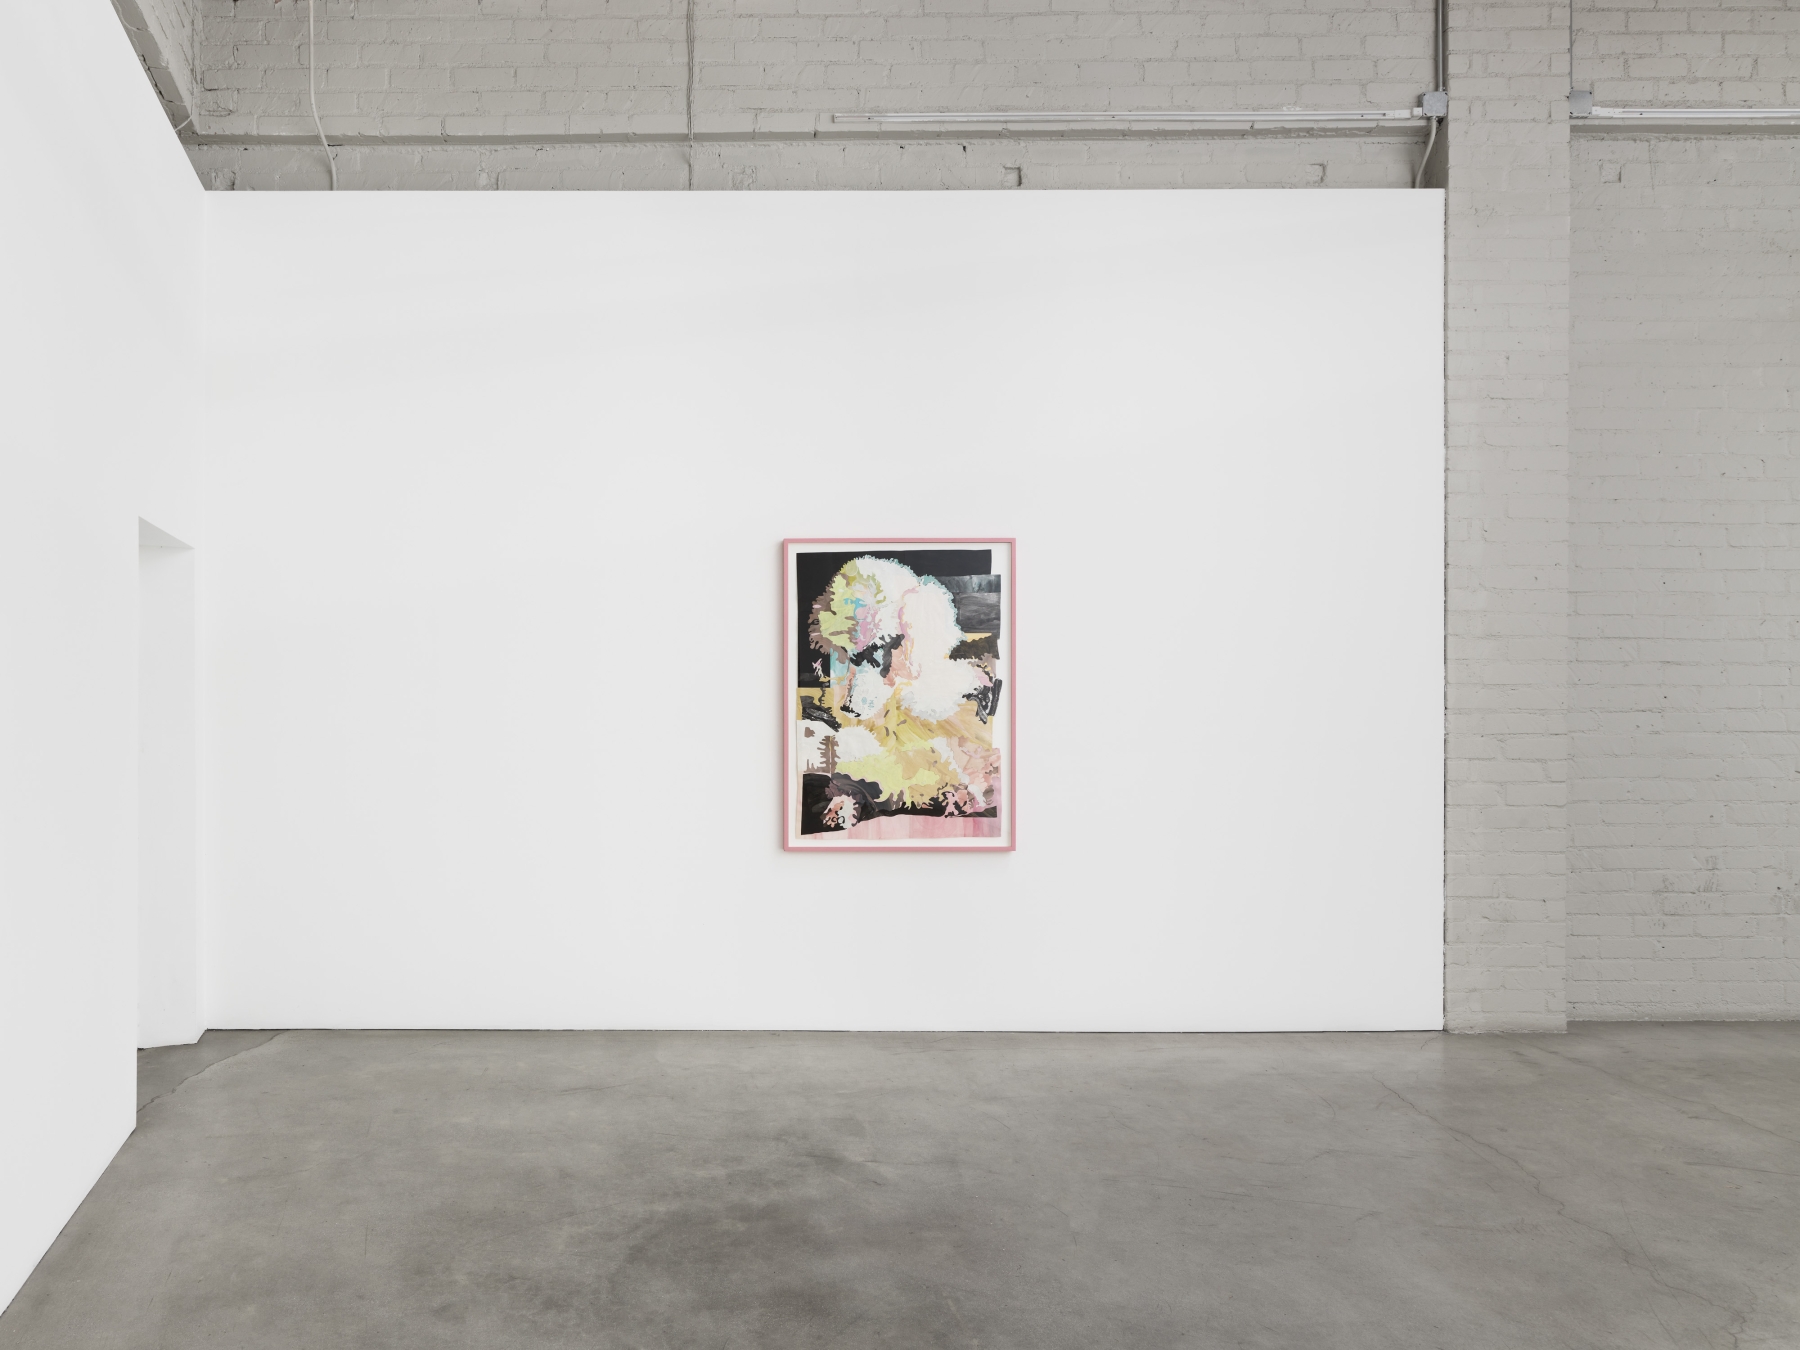 Clare Woods,&nbsp;After Limbo, installation view, 2022